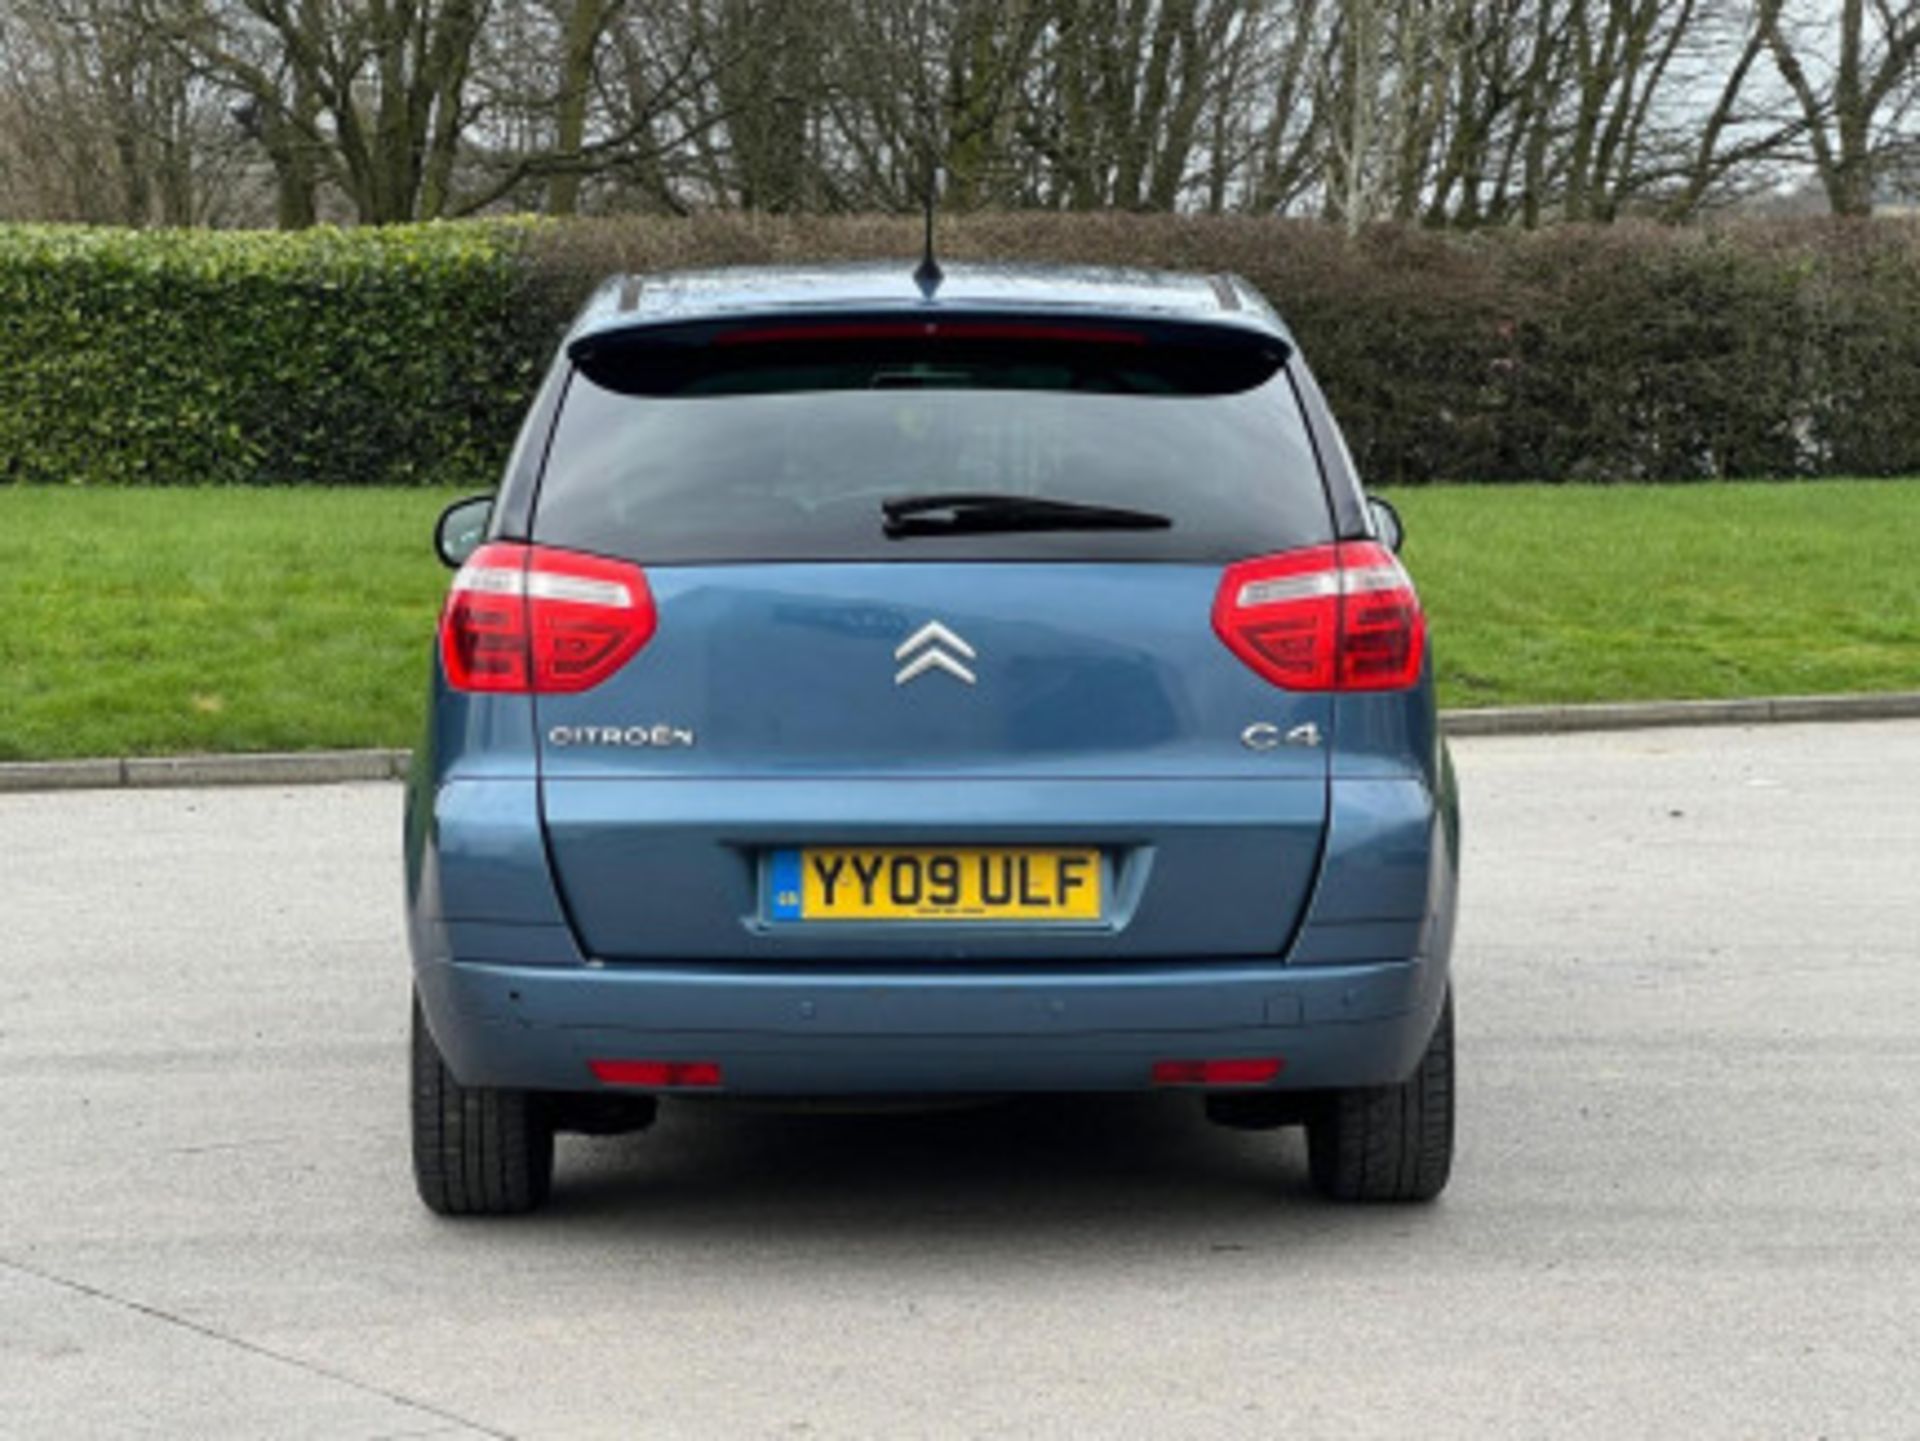 2009 CITROEN C4 PICASSO 1.6 HDI VTR+ EGS6 5DR >>--NO VAT ON HAMMER--<< - Image 56 of 123